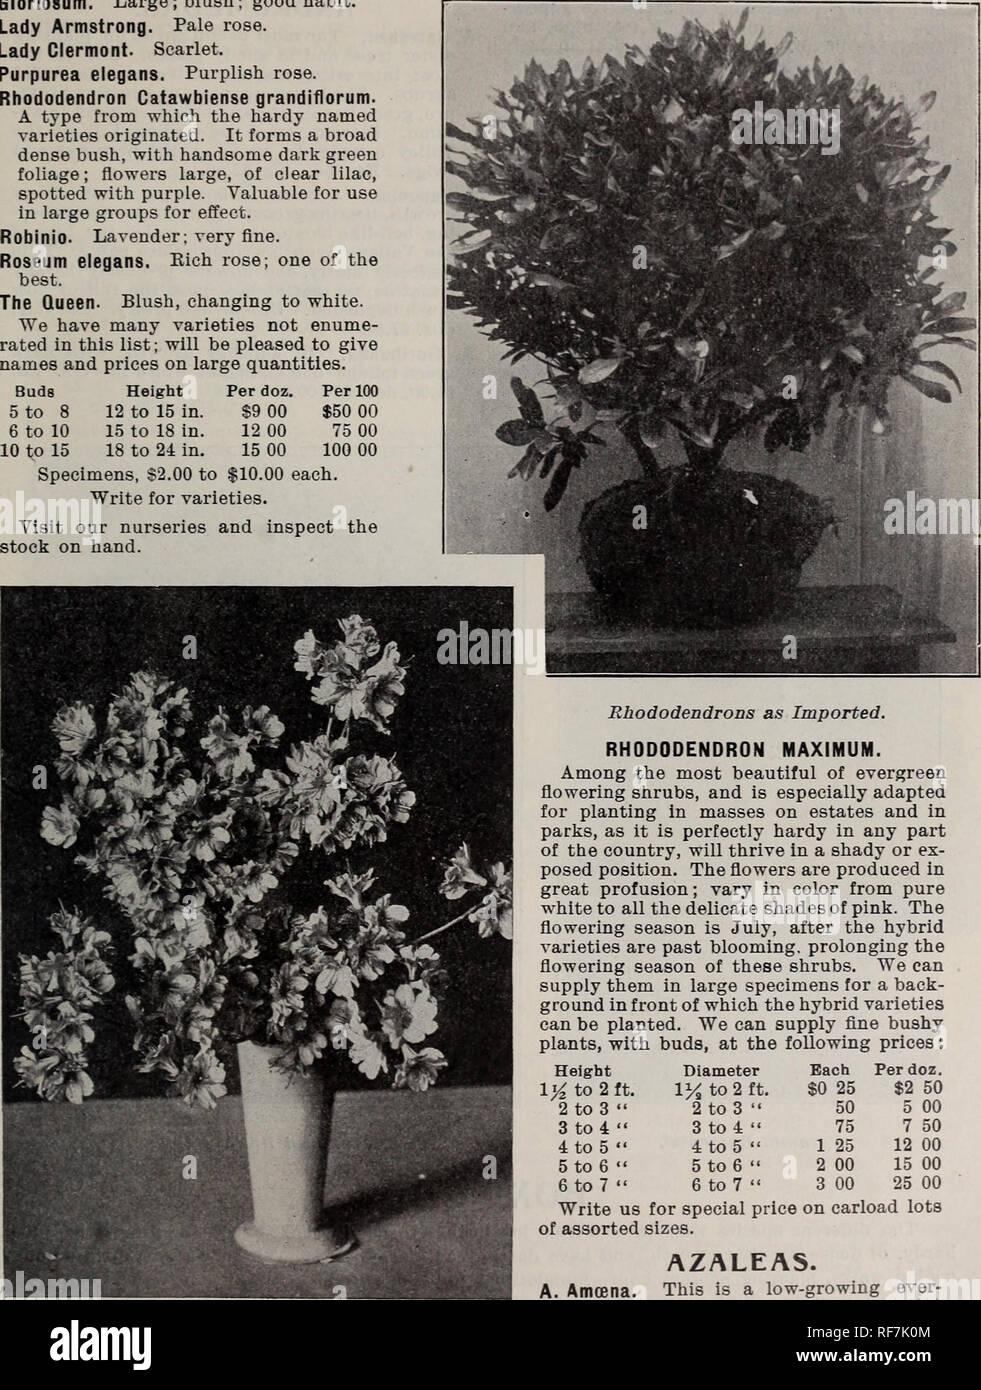 . Rhododendrons, boxwood, azaleas, clematis, novelties, bay trees, hardy plants, evergreens : novelties bulbs, cannas novelties, palms, araucarias, ferns, vines, orchids, flowering shrubs, ornamental grasses and trees. Nursery stock New Jersey Rutherford Catalogs; Bulbs (Plants) Catalogs; Flowers Seeds Catalogs; Plants, Ornamental Catalogs; Flowering shrubs Catalogs; Trees Seedlings Catalogs. Cvcr&lt;^rccD 8brab» Gloriosum. Large; blush; good habit. Lady Armstrong. Pale rose. Lady Clermont. Scarlet. Purpurea elegans. Purplish rose. Rhododendron Catawbiense grandiflorum. A type from which the h Stock Photo